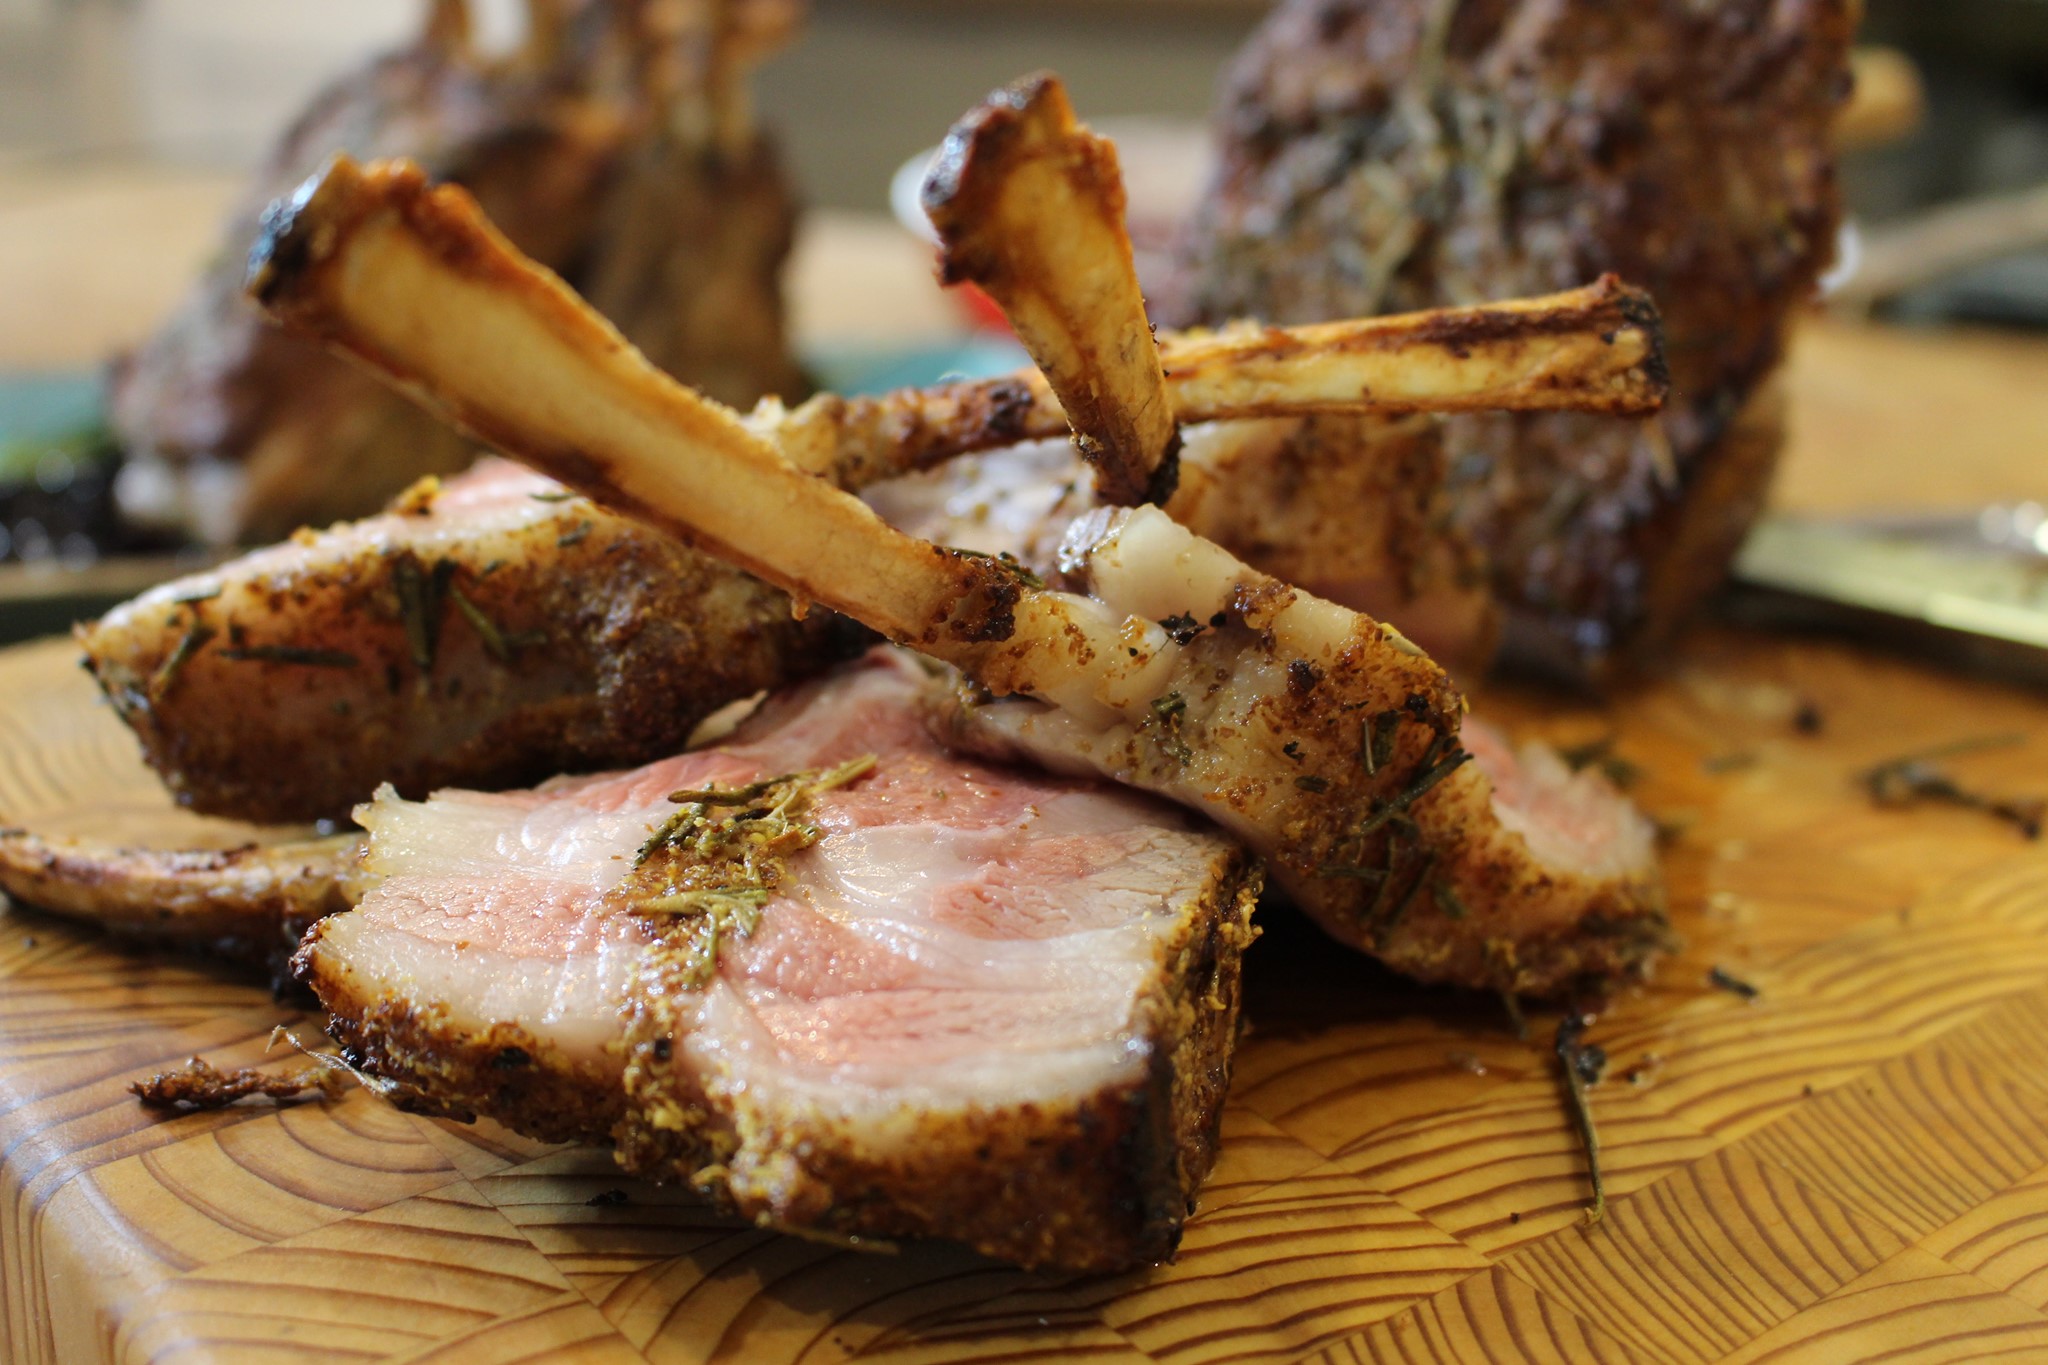 Northumberlamb “Rack of lamb” with a Wild Blueberry Rosemary Sauce